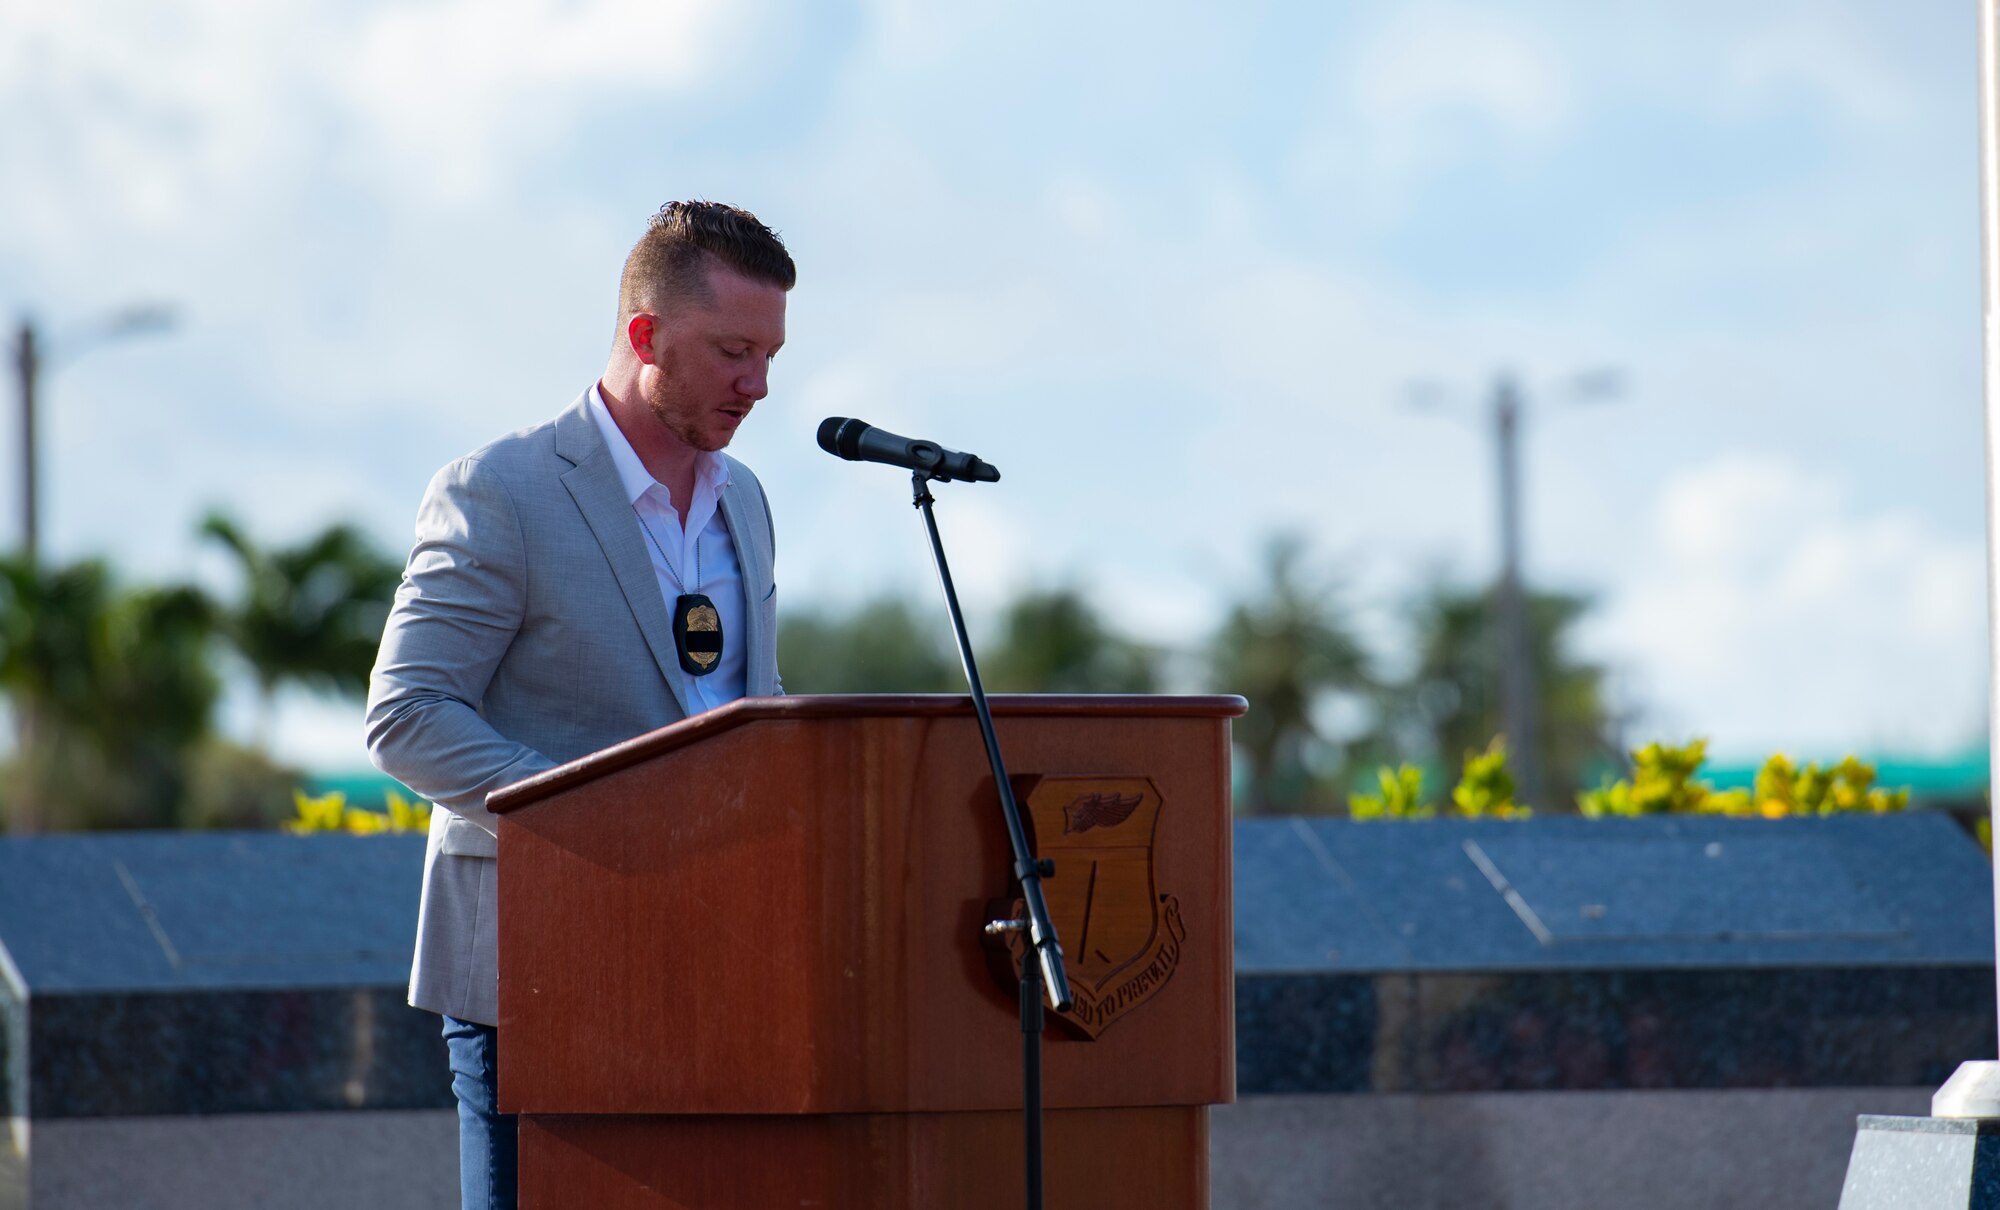 Special Agent Daniel Scarola, Department of the Air Force Office of Special Investigations, delivers remarks during an opening memorial ceremony for National Police Week May 16, 2022, at Andersen Air Force Base, Guam. National Police Week offers honor, remembrance and peer support while allowing law enforcement survivors and citizens to gather and pay homage to those who gave their life in the line of duty.(U.S. Air Force Photo by Senior Airman Helena Owens)